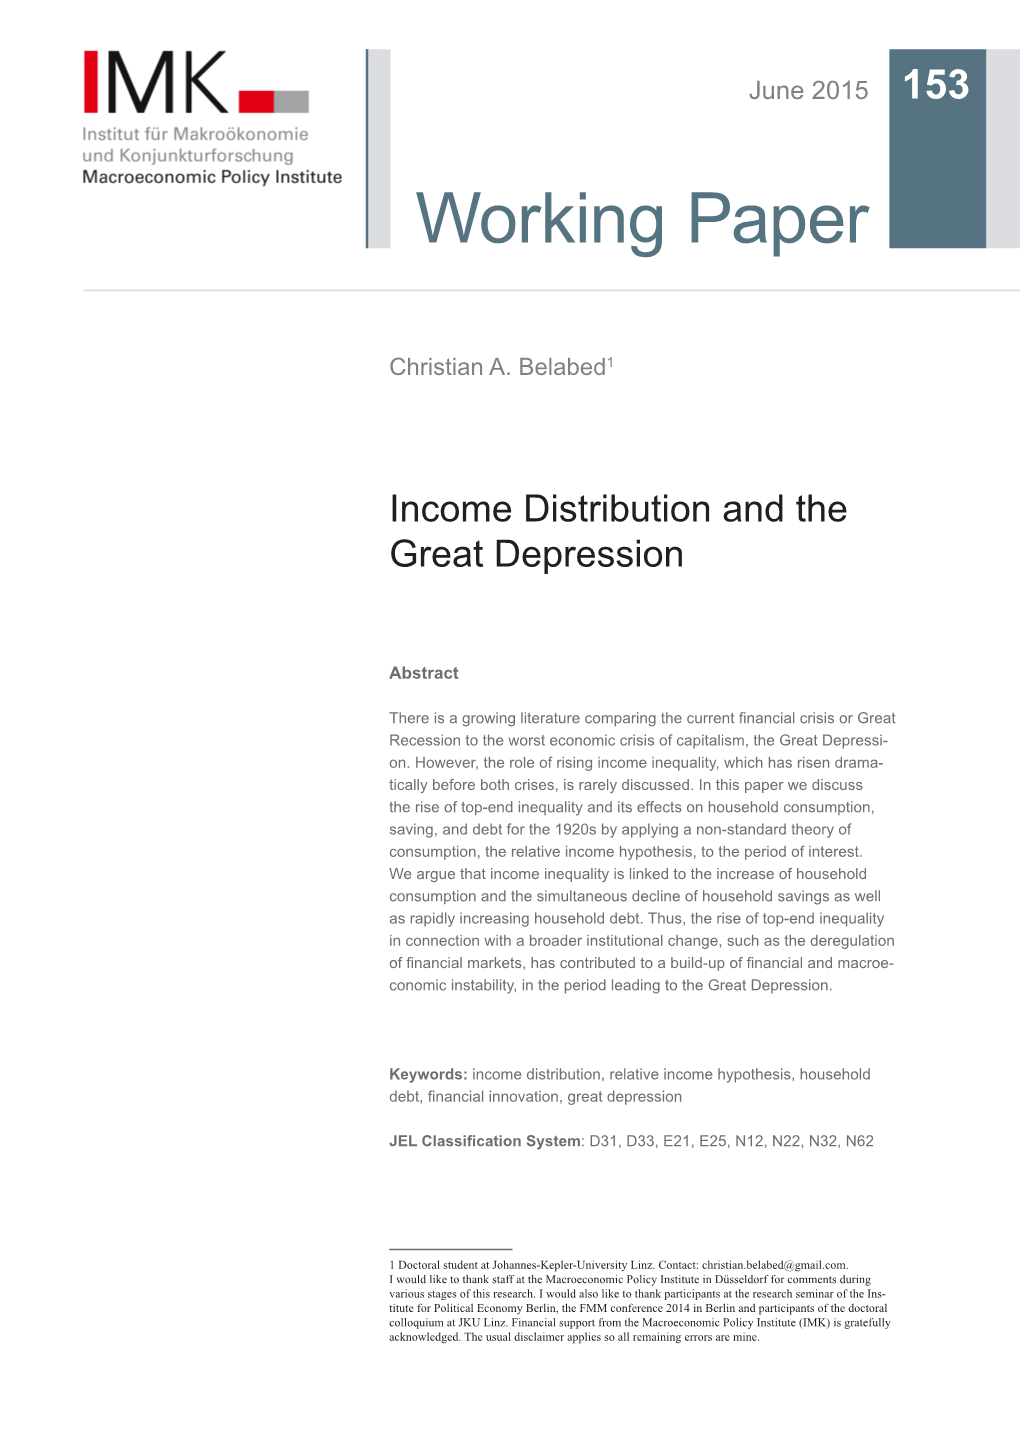 Income Distribution and the Great Depression